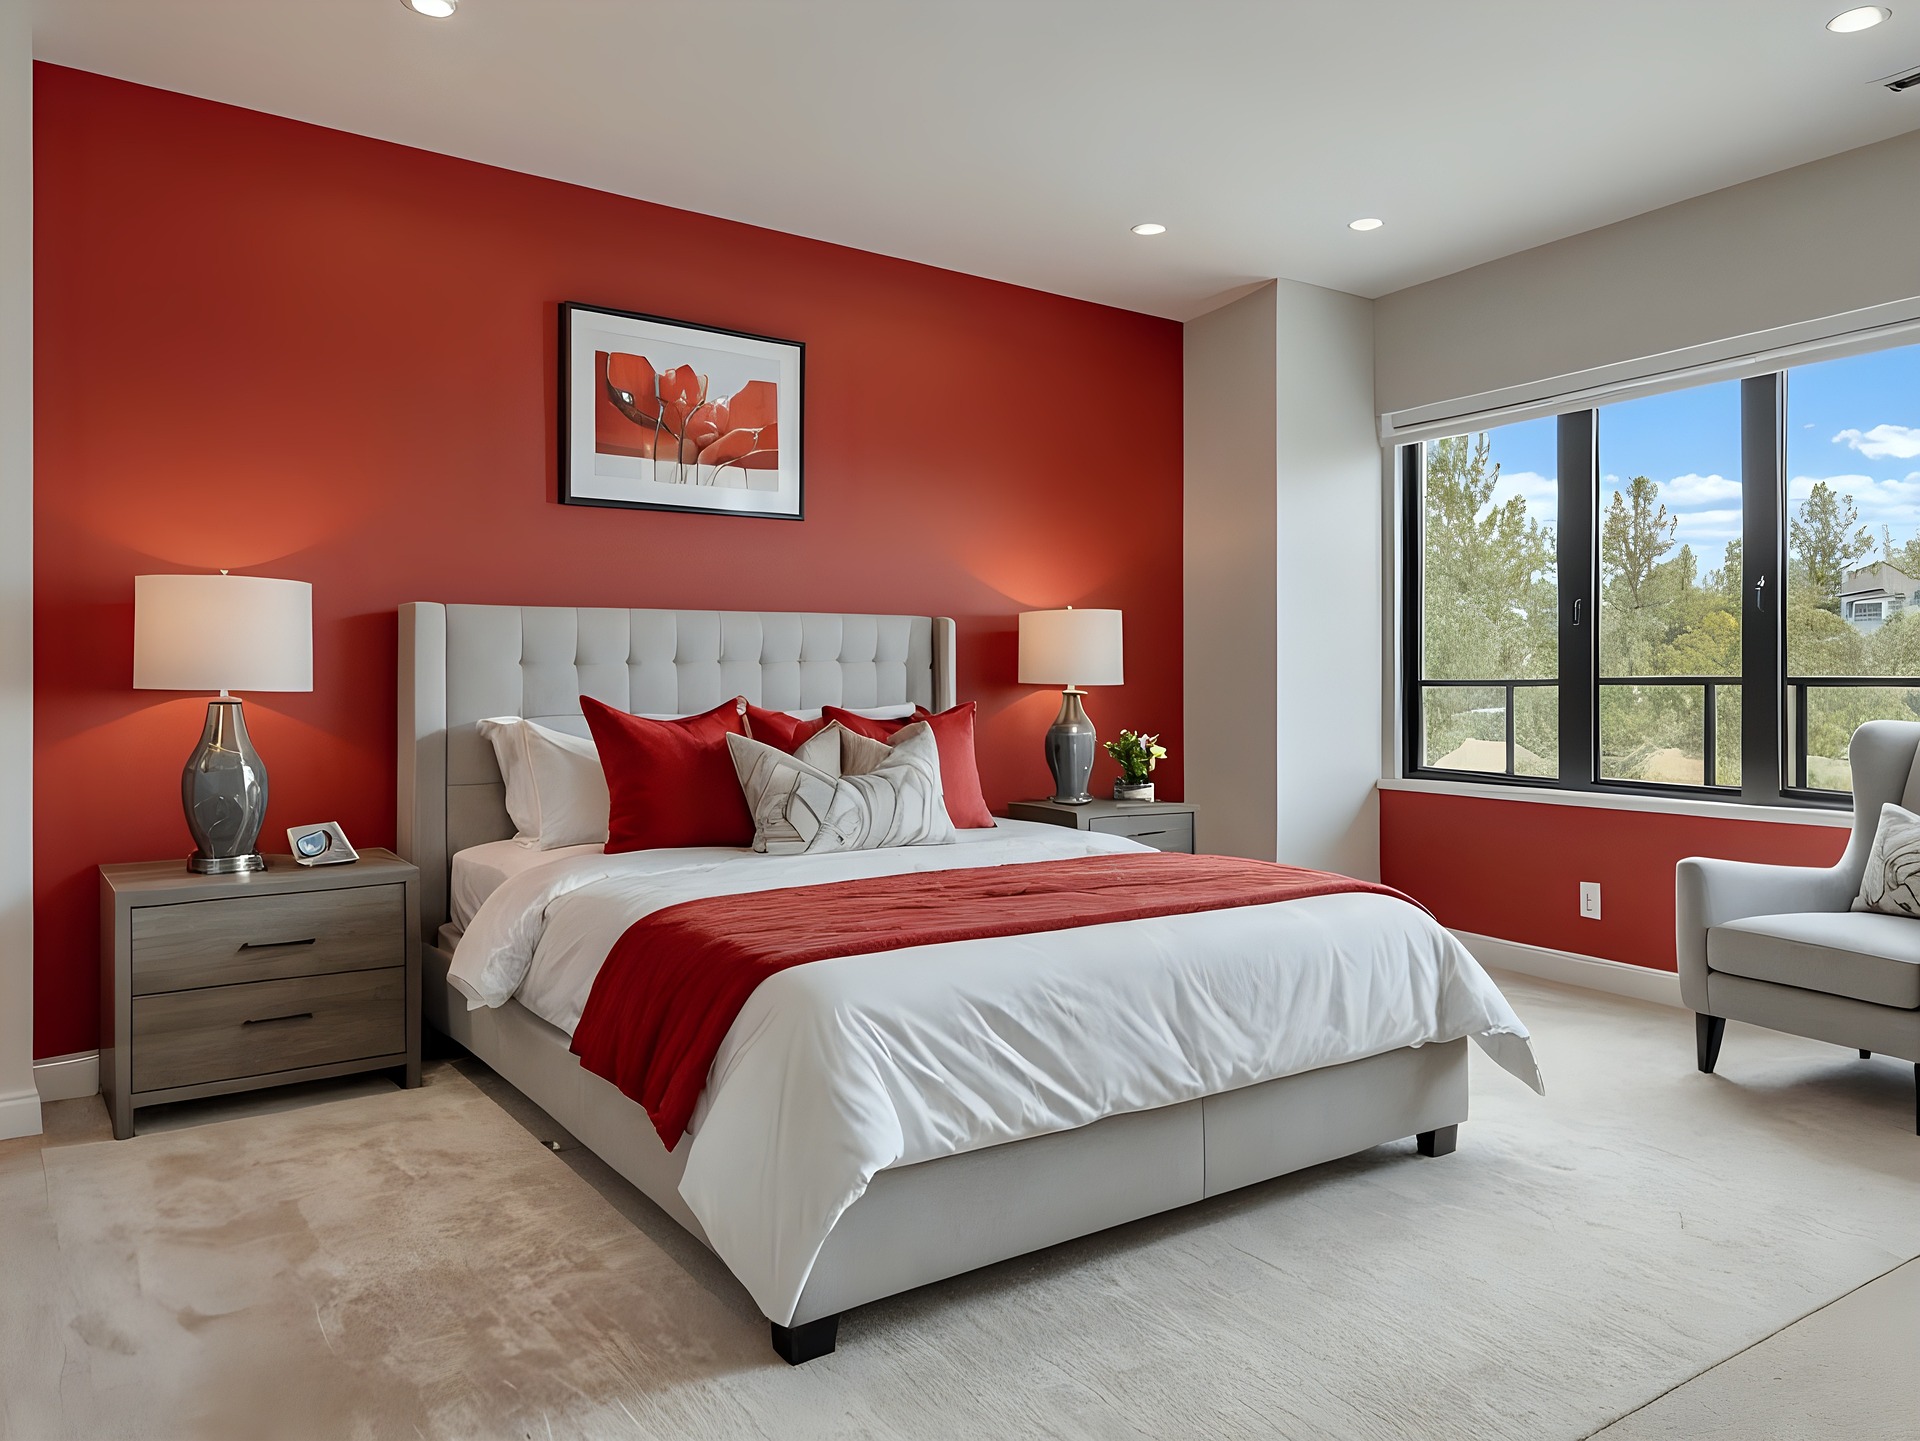 Design Tips and Tricks to Create a Luxury Feel in Your Bedroom